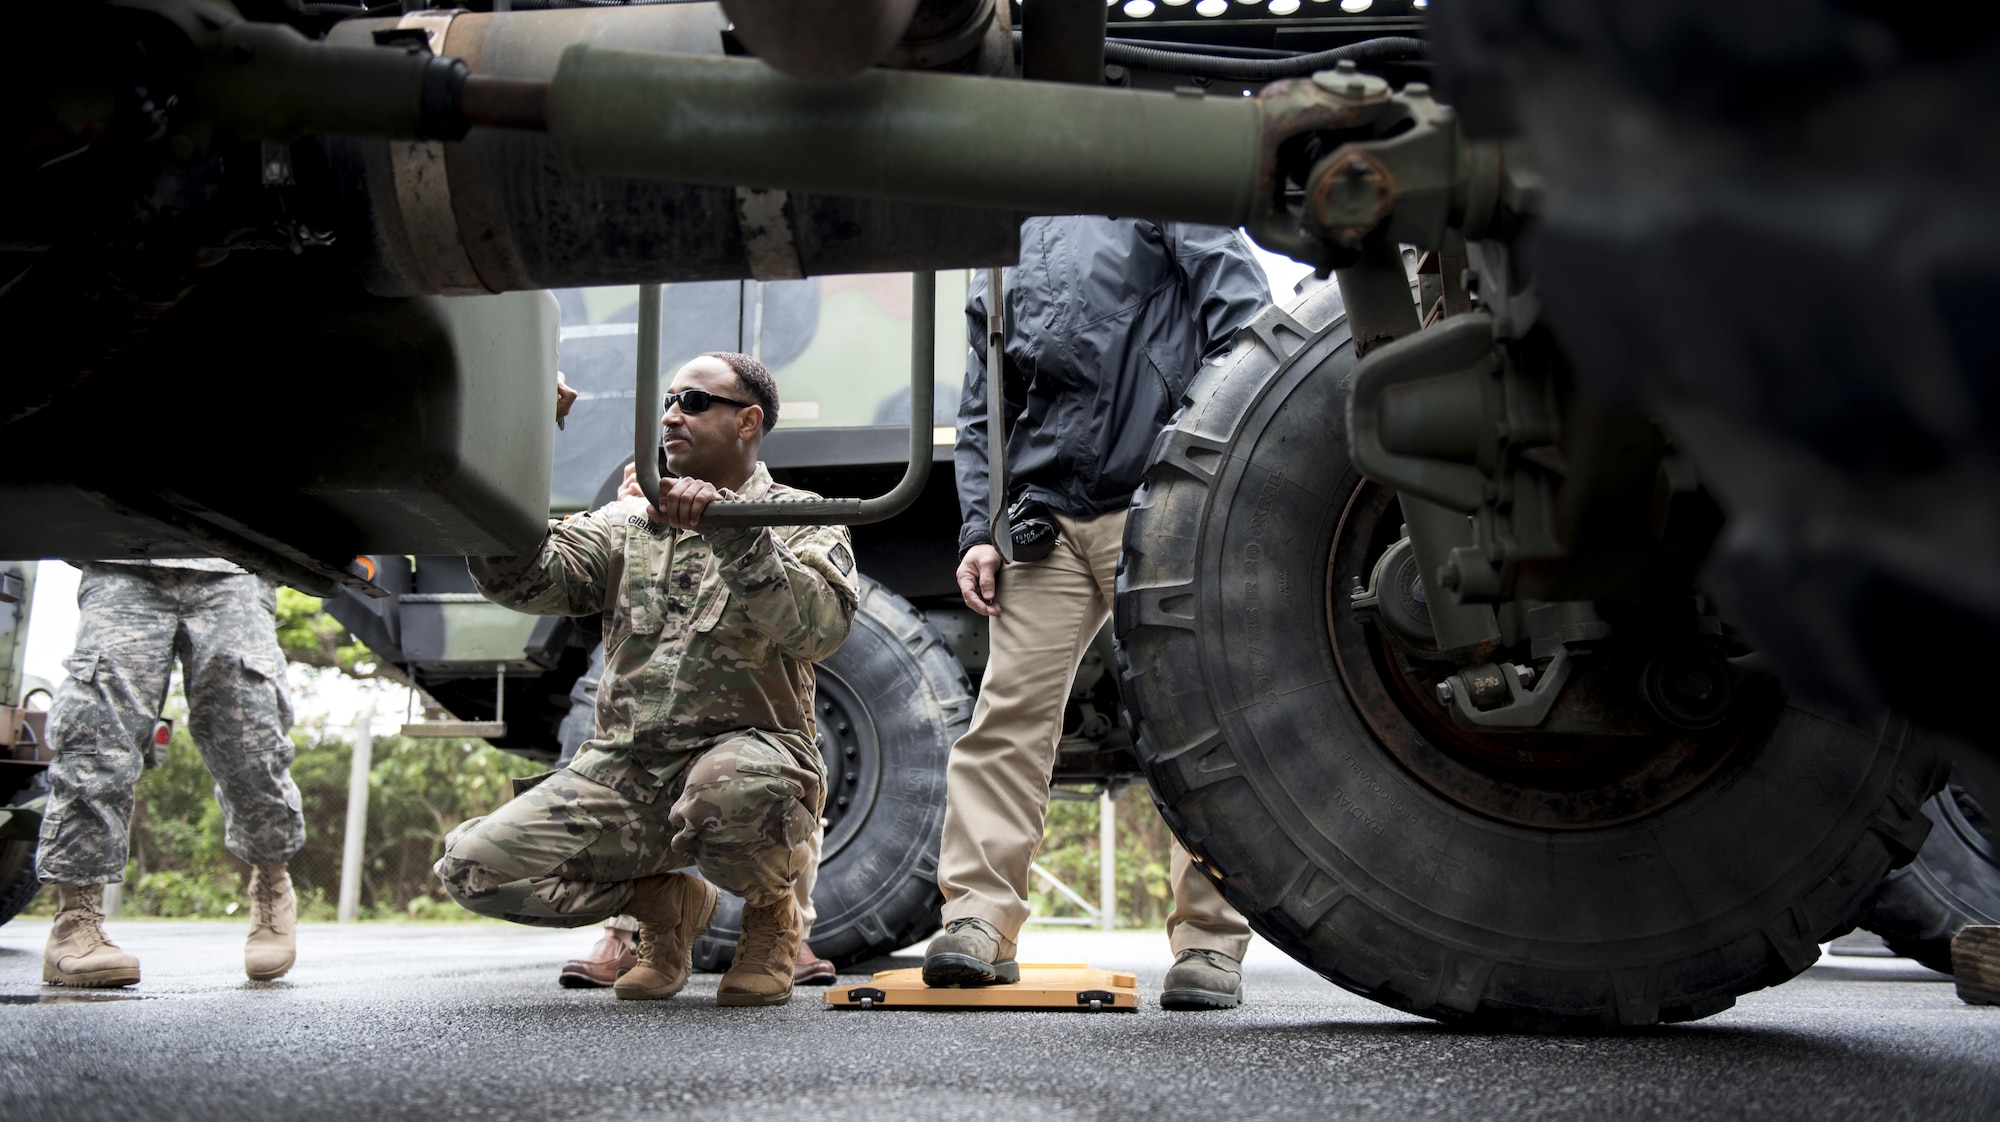 U.S. Army Staff Sgt. Dawayn Gibbs, 1st Battalion, 1st Air Defense Artillery Regiement headquarters noncommissioned officer-in-charge, writes down the weight of a Patriot missile battery during rapid load training March 14, 2017, on Kadena Air Base, Japan. U.S. Soldiers from the 1-1 ADA train alongside units from the Japan Self-Defense force regularly to provide missile defense for Okinawa.  (U.S. Air Force photo by Senior Airman Omari Bernard)